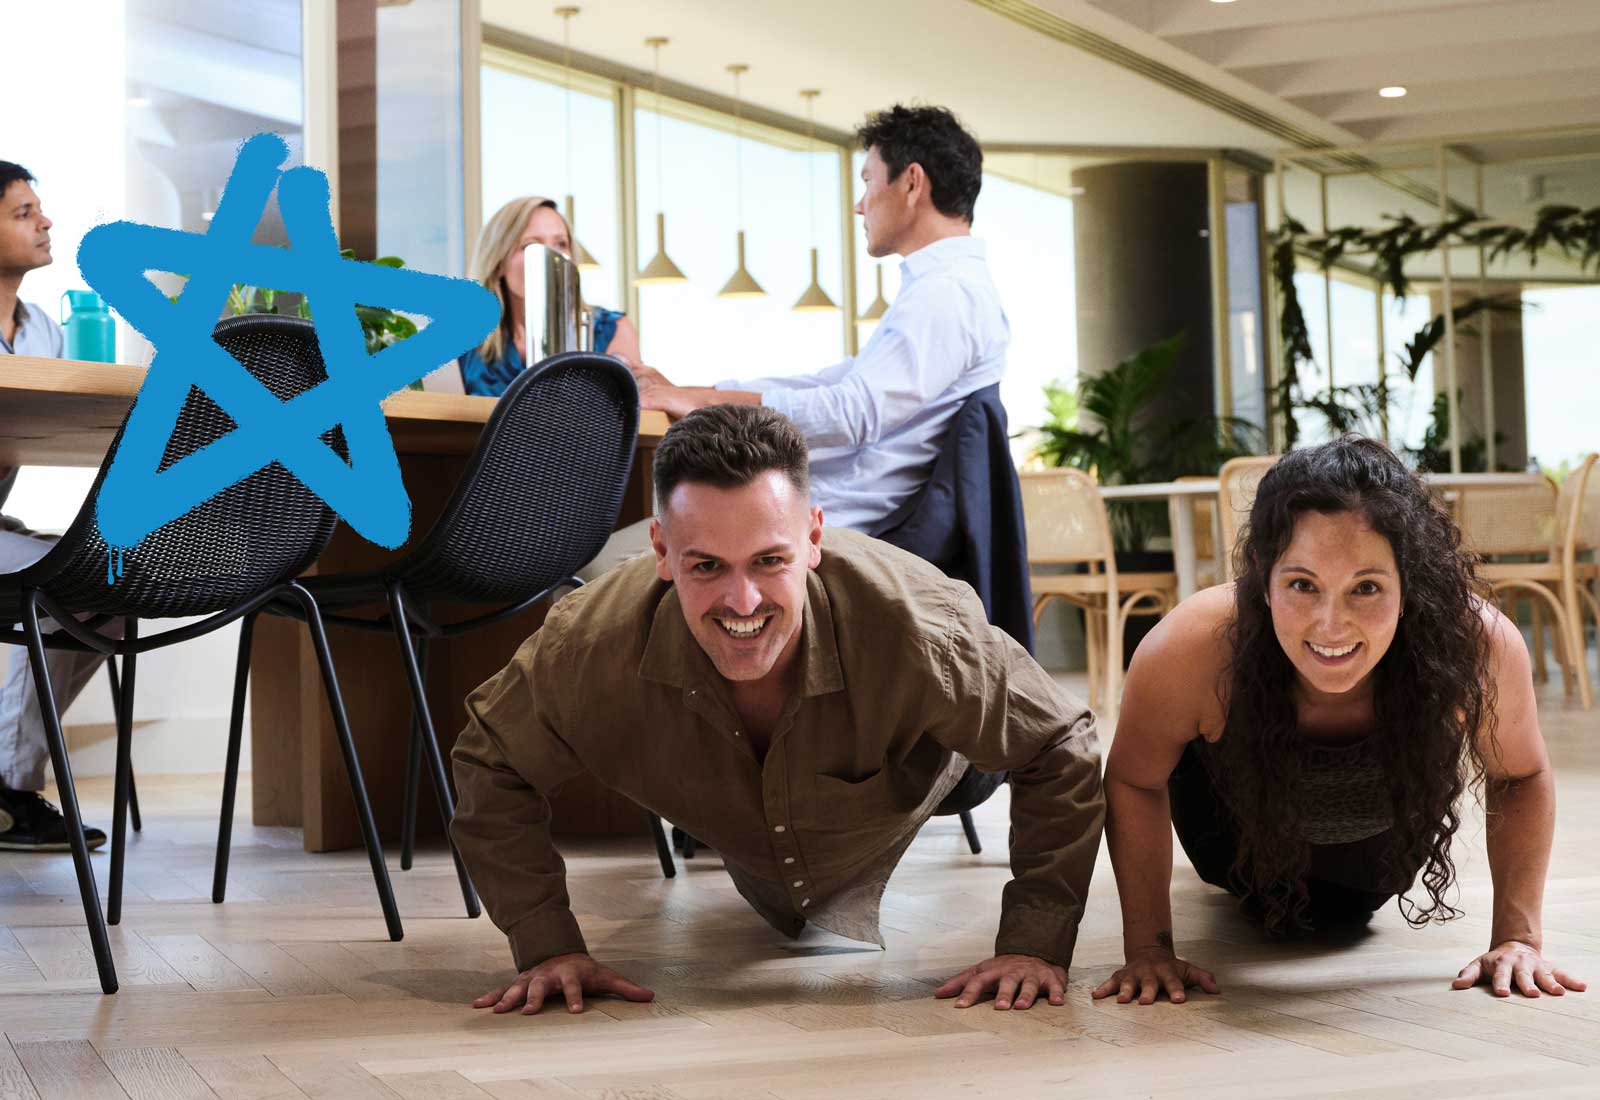 A man and a woman do Push-ups in a workplace setting, The image is overlayed with a blue graffiti star as part of the Push-Up Challenge brand campaign